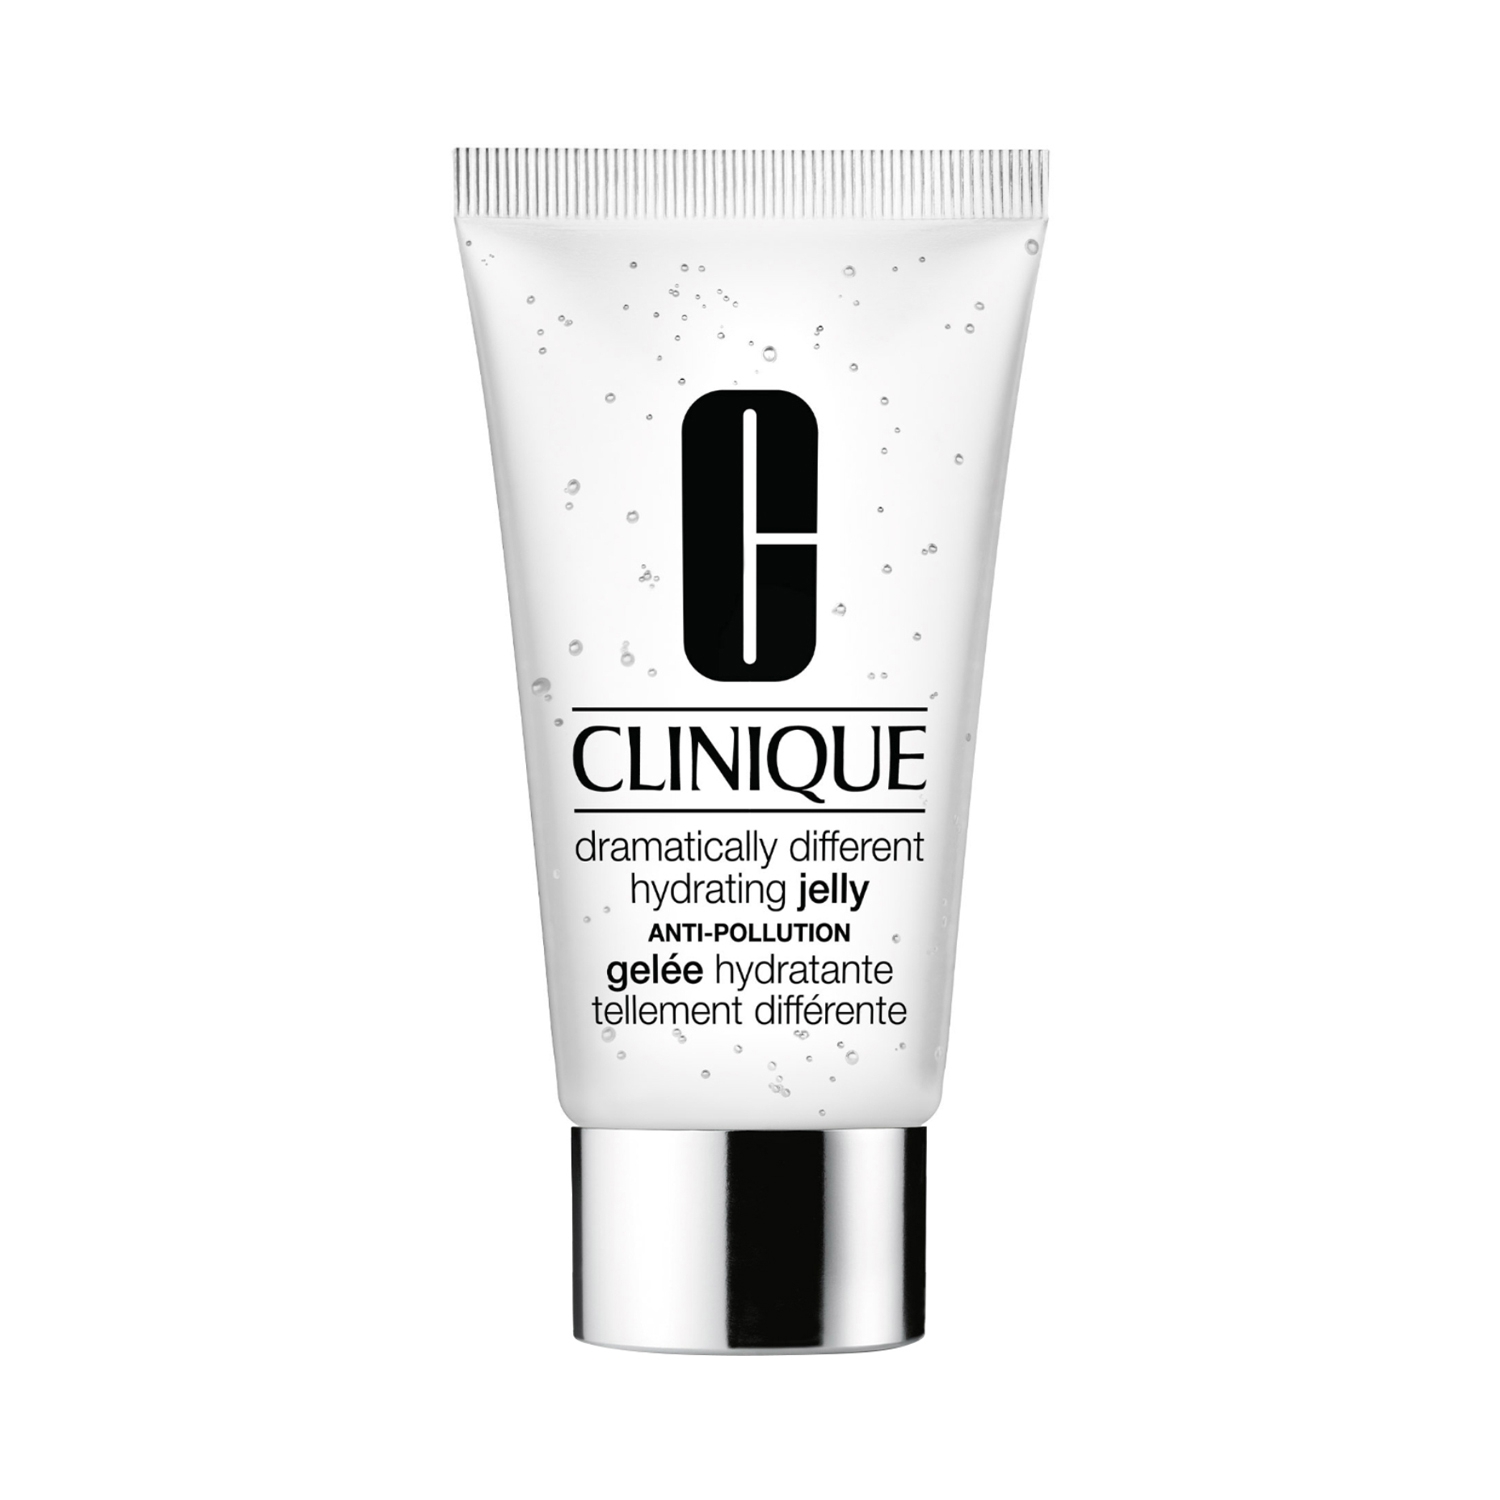 CLINIQUE | CLINIQUE Dramatically Different Hydrating Jelly (50ml)